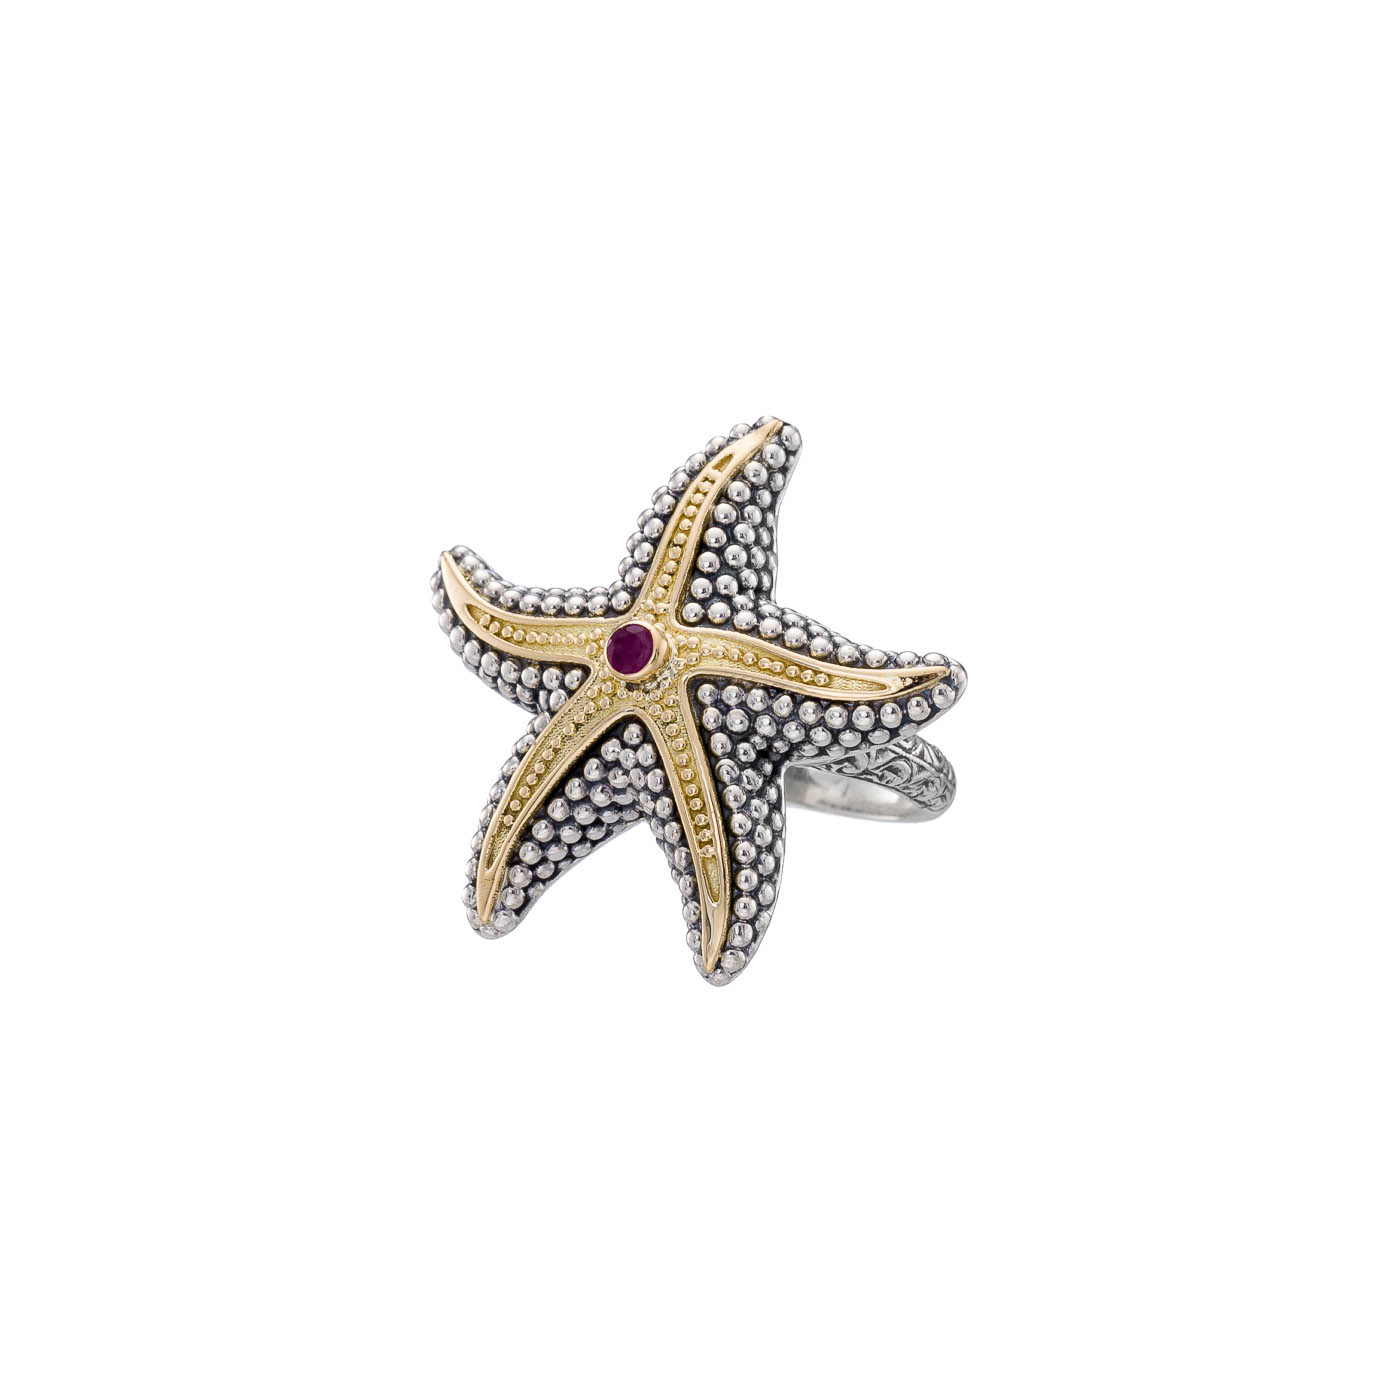 Starfish big Ring in 18K Gold and Sterling Silver with Gemstone